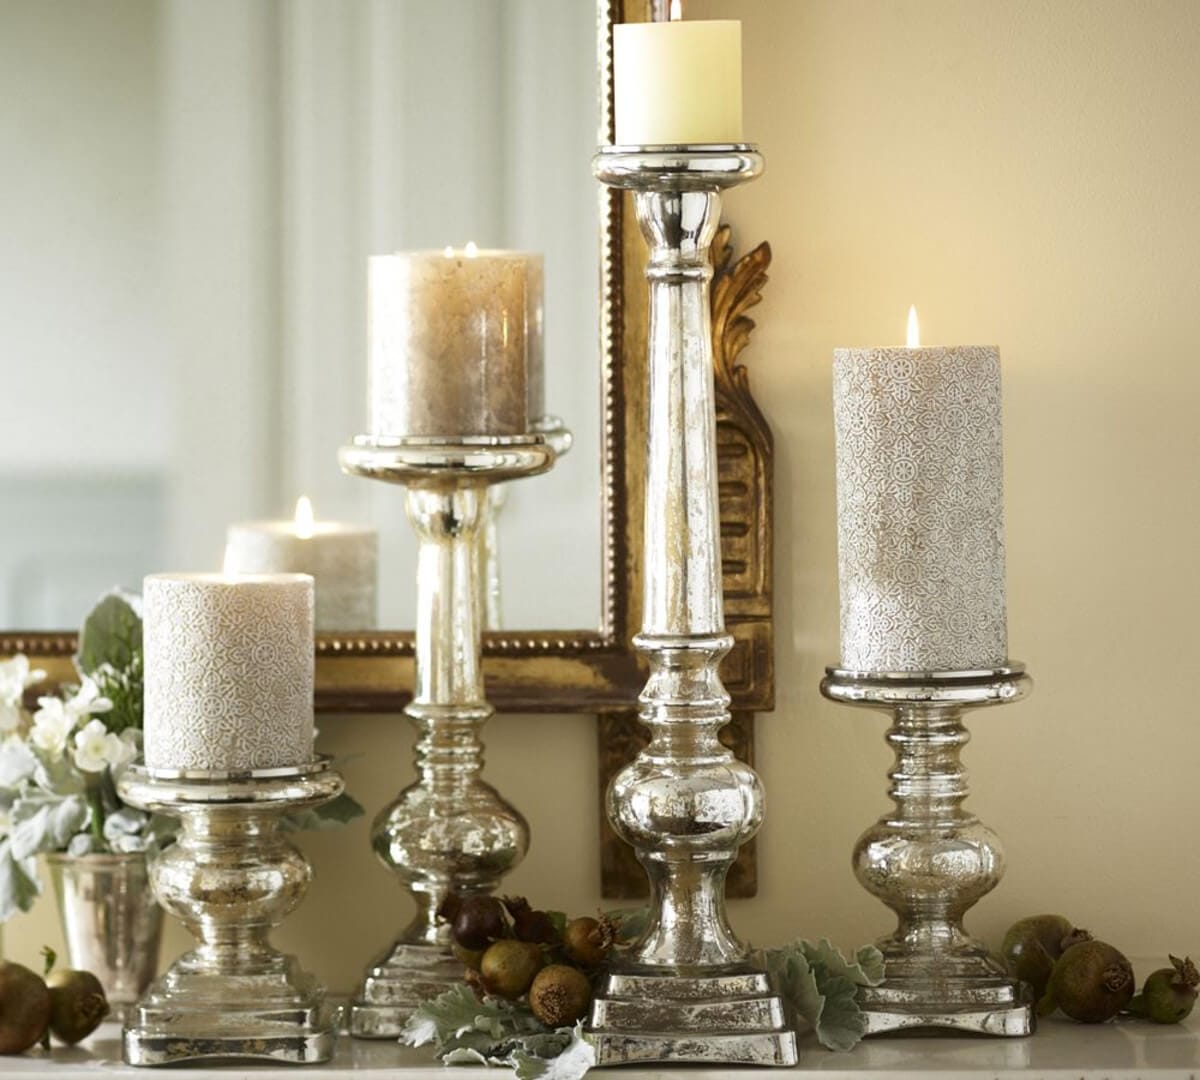 Rustic Glam Decor Ideas with Antique Candle Holders